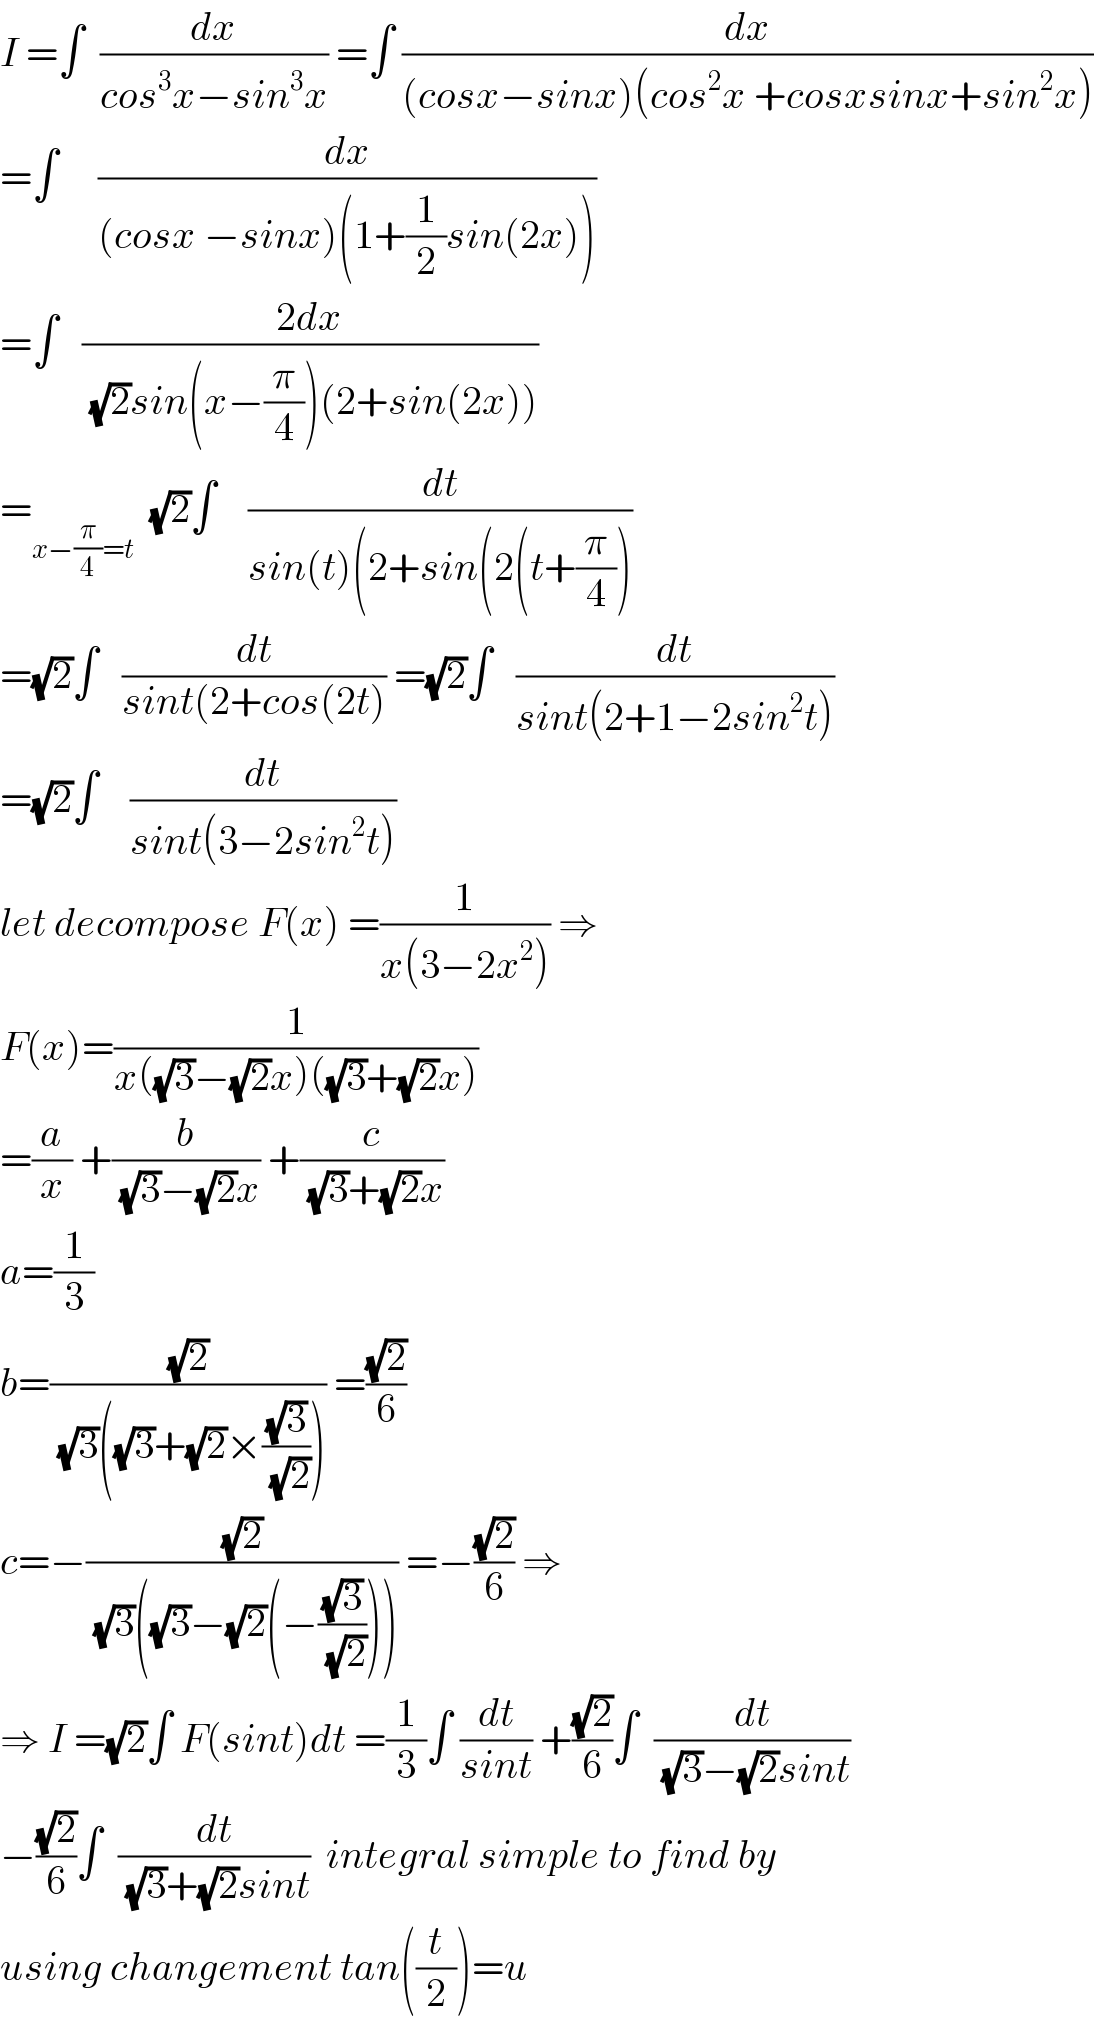 I =∫  (dx/(cos^3 x−sin^3 x)) =∫ (dx/((cosx−sinx)(cos^2 x +cosxsinx+sin^2 x)))  =∫     (dx/((cosx −sinx)(1+(1/2)sin(2x))))  =∫   ((2dx)/((√2)sin(x−(π/4))(2+sin(2x))))  =_(x−(π/4)=t)   (√2)∫    (dt/(sin(t)(2+sin(2(t+(π/4))))  =(√2)∫   (dt/(sint(2+cos(2t))) =(√2)∫   (dt/(sint(2+1−2sin^2 t)))  =(√2)∫    (dt/(sint(3−2sin^2 t)))  let decompose F(x) =(1/(x(3−2x^2 ))) ⇒  F(x)=(1/(x((√3)−(√2)x)((√3)+(√2)x)))  =(a/x) +(b/((√3)−(√2)x)) +(c/((√3)+(√2)x))  a=(1/3)  b=((√2)/((√3)((√3)+(√2)×((√3)/(√2))))) =((√2)/6)  c=−((√2)/((√3)((√3)−(√2)(−((√3)/(√2)))))) =−((√2)/6) ⇒  ⇒ I =(√2)∫ F(sint)dt =(1/3)∫ (dt/(sint)) +((√2)/6)∫  (dt/((√3)−(√2)sint))  −((√2)/6)∫  (dt/((√3)+(√2)sint))  integral simple to find by  using changement tan((t/2))=u  